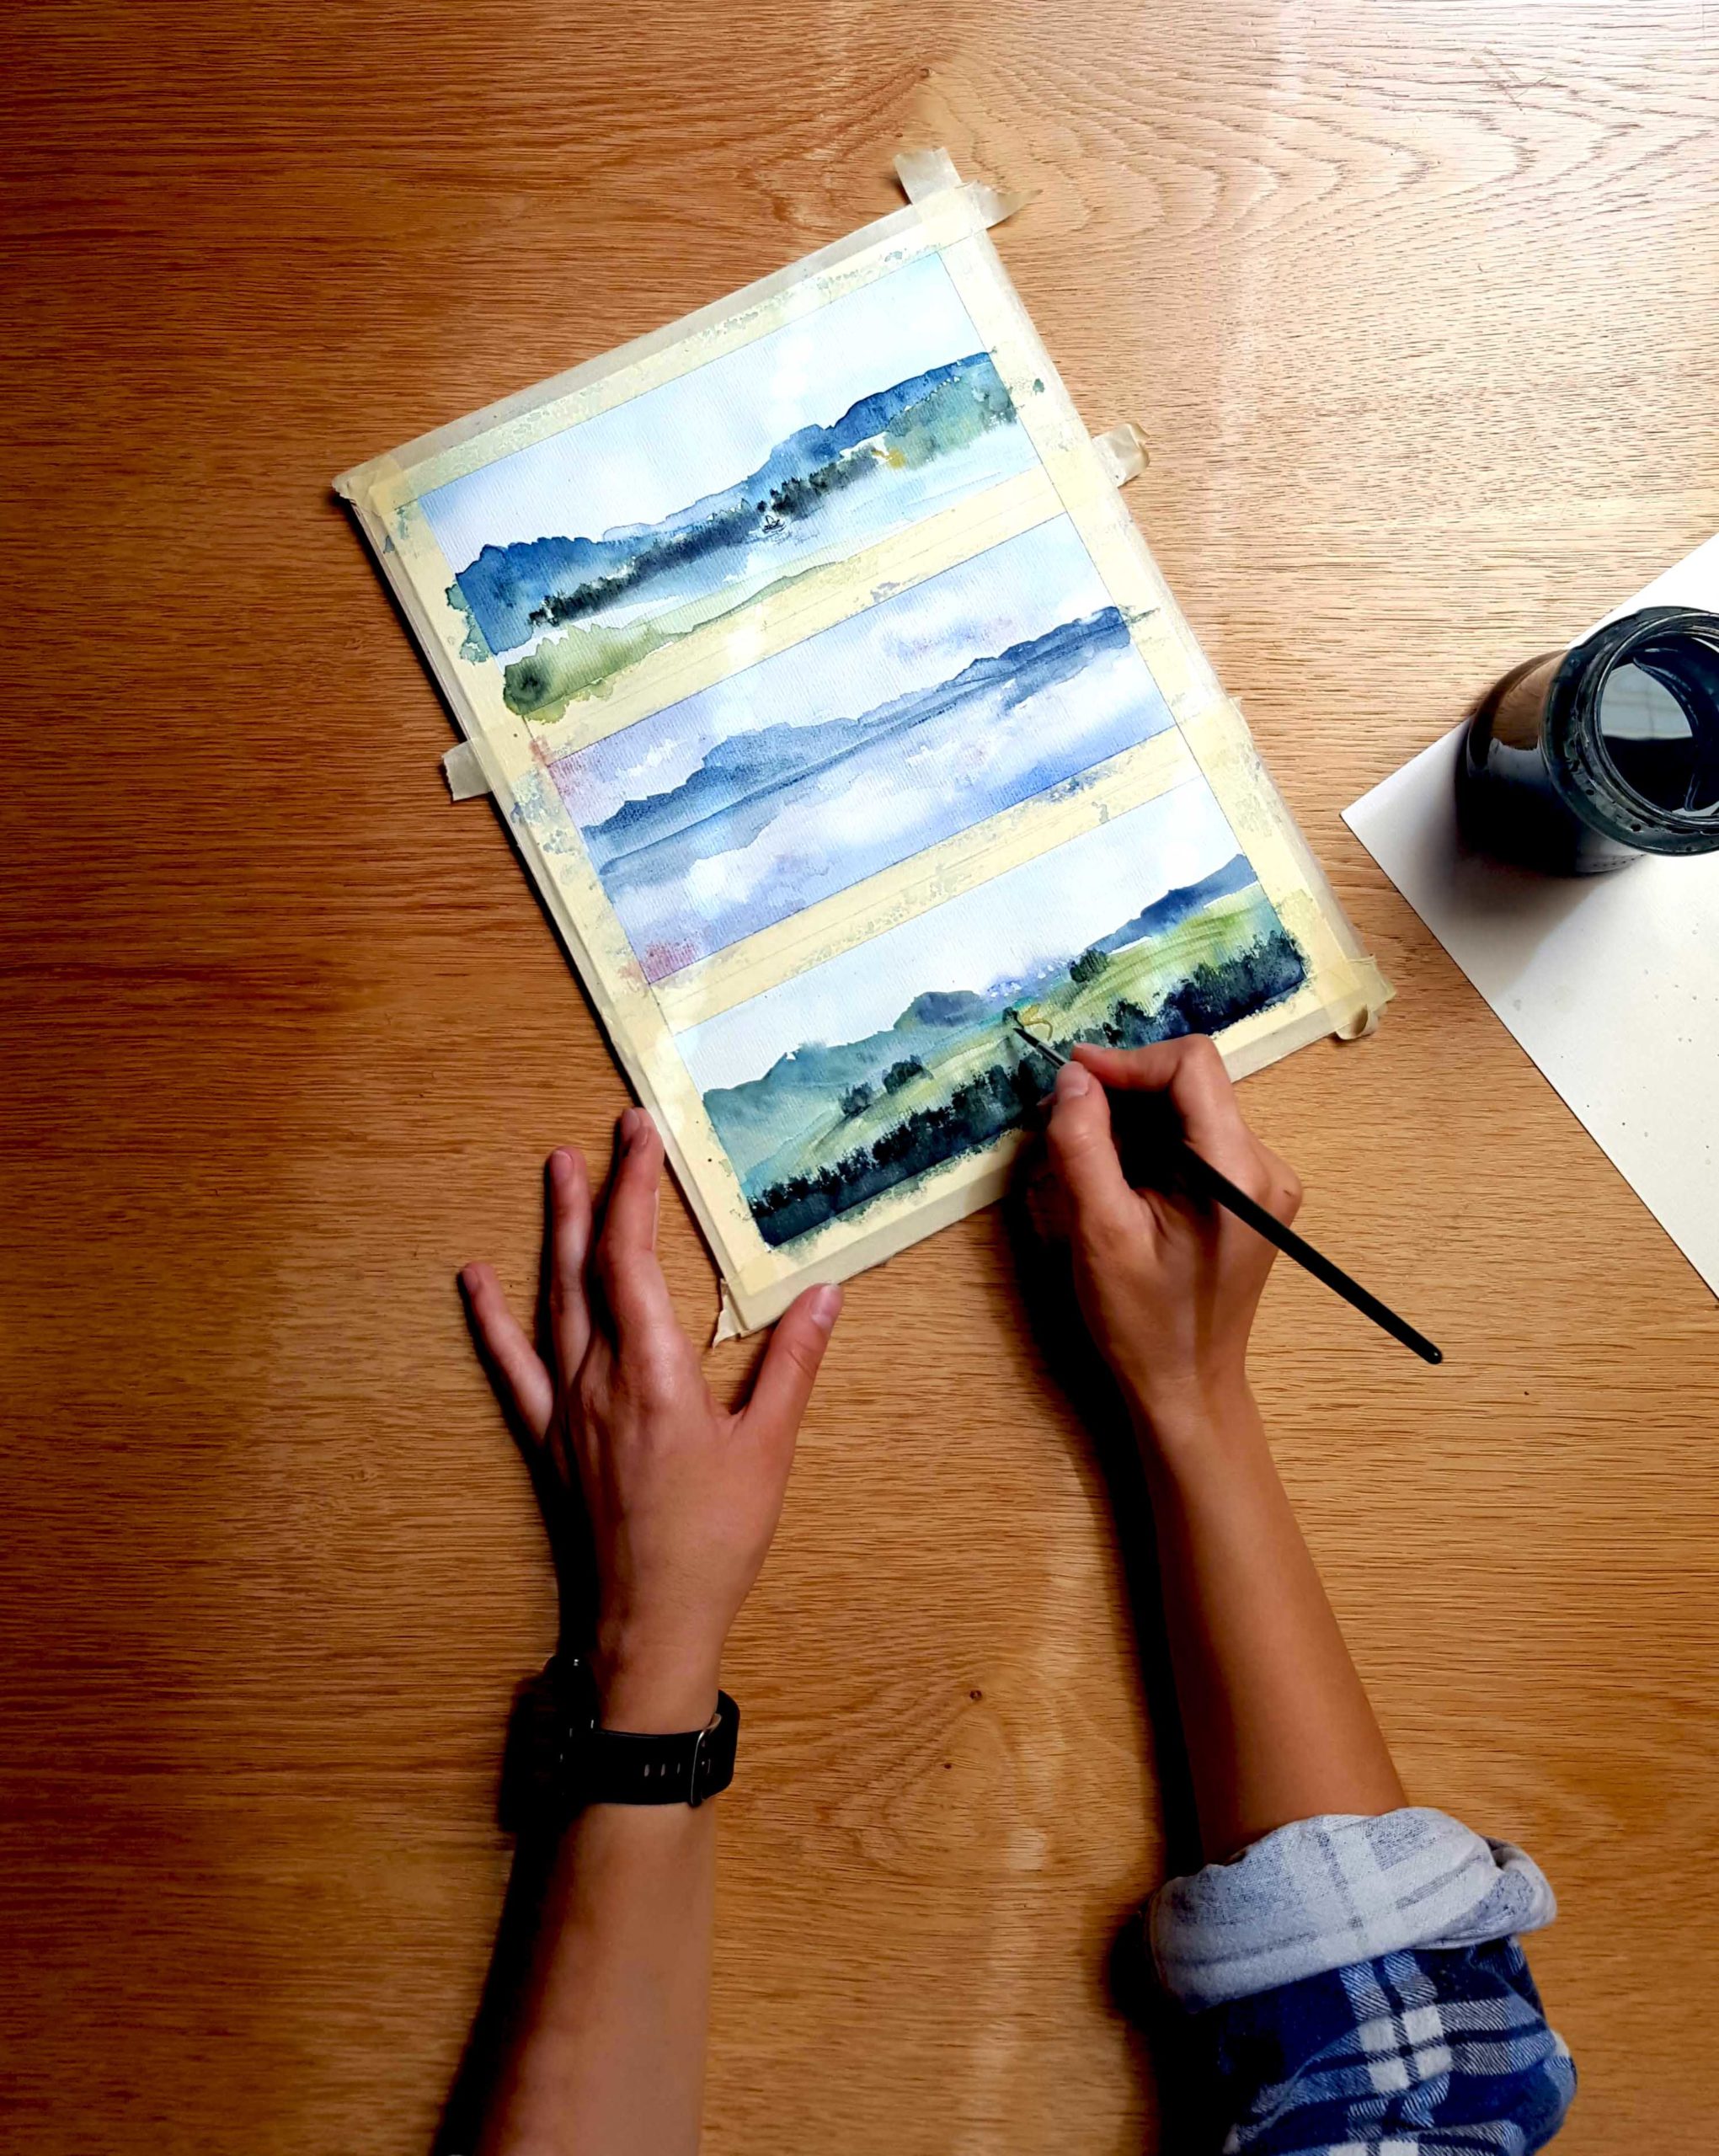 How to Paint Mountains and Lakes in Watercolor - Time Lapse